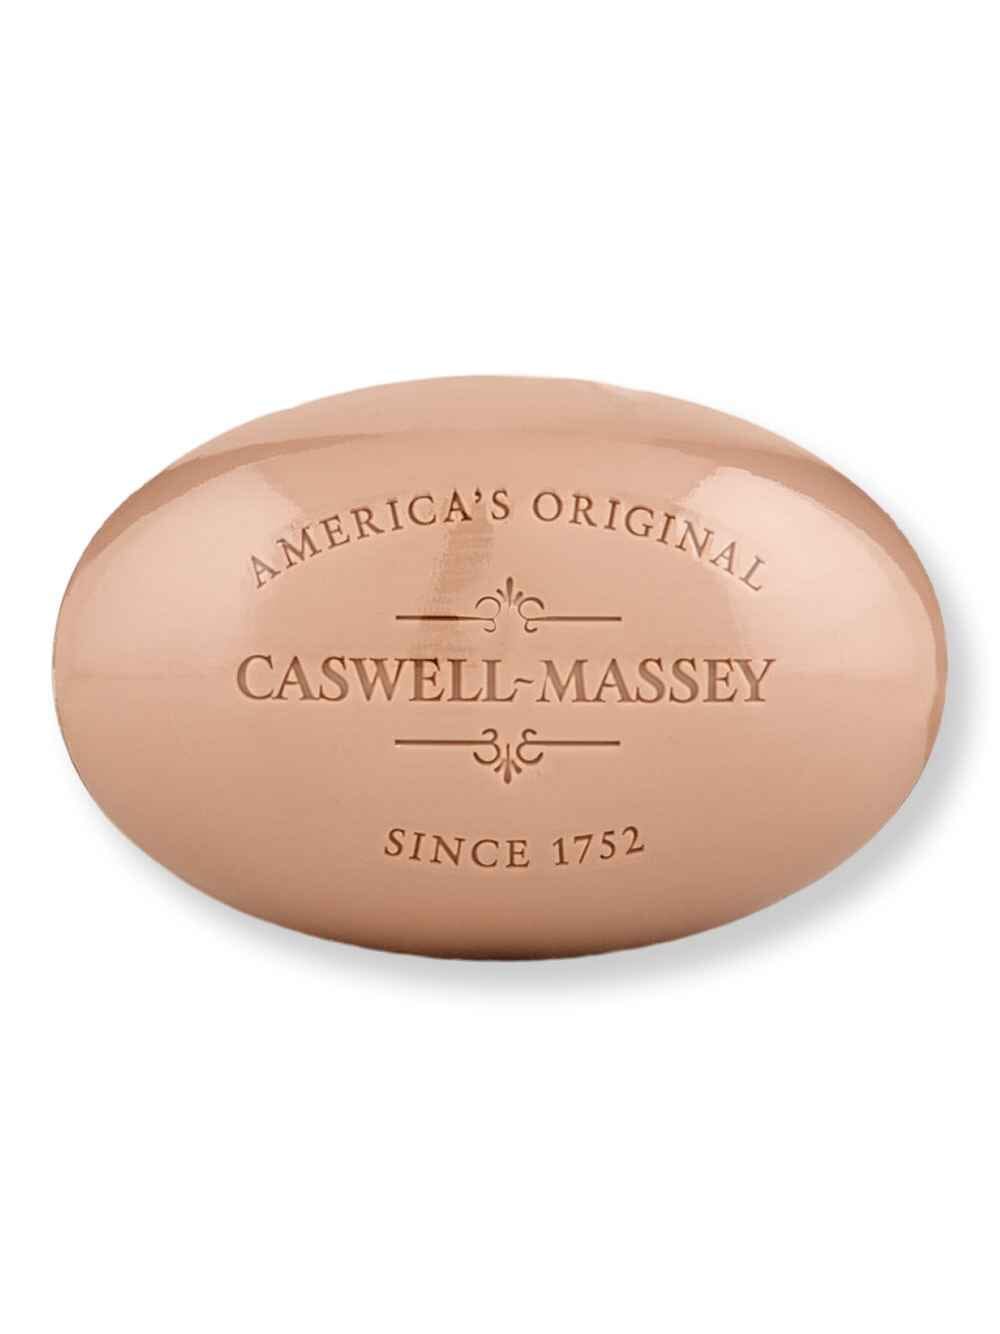 Caswell Massey Caswell Massey Heritage Tricorn Bar Soap 5.8 oz Bar Soaps 